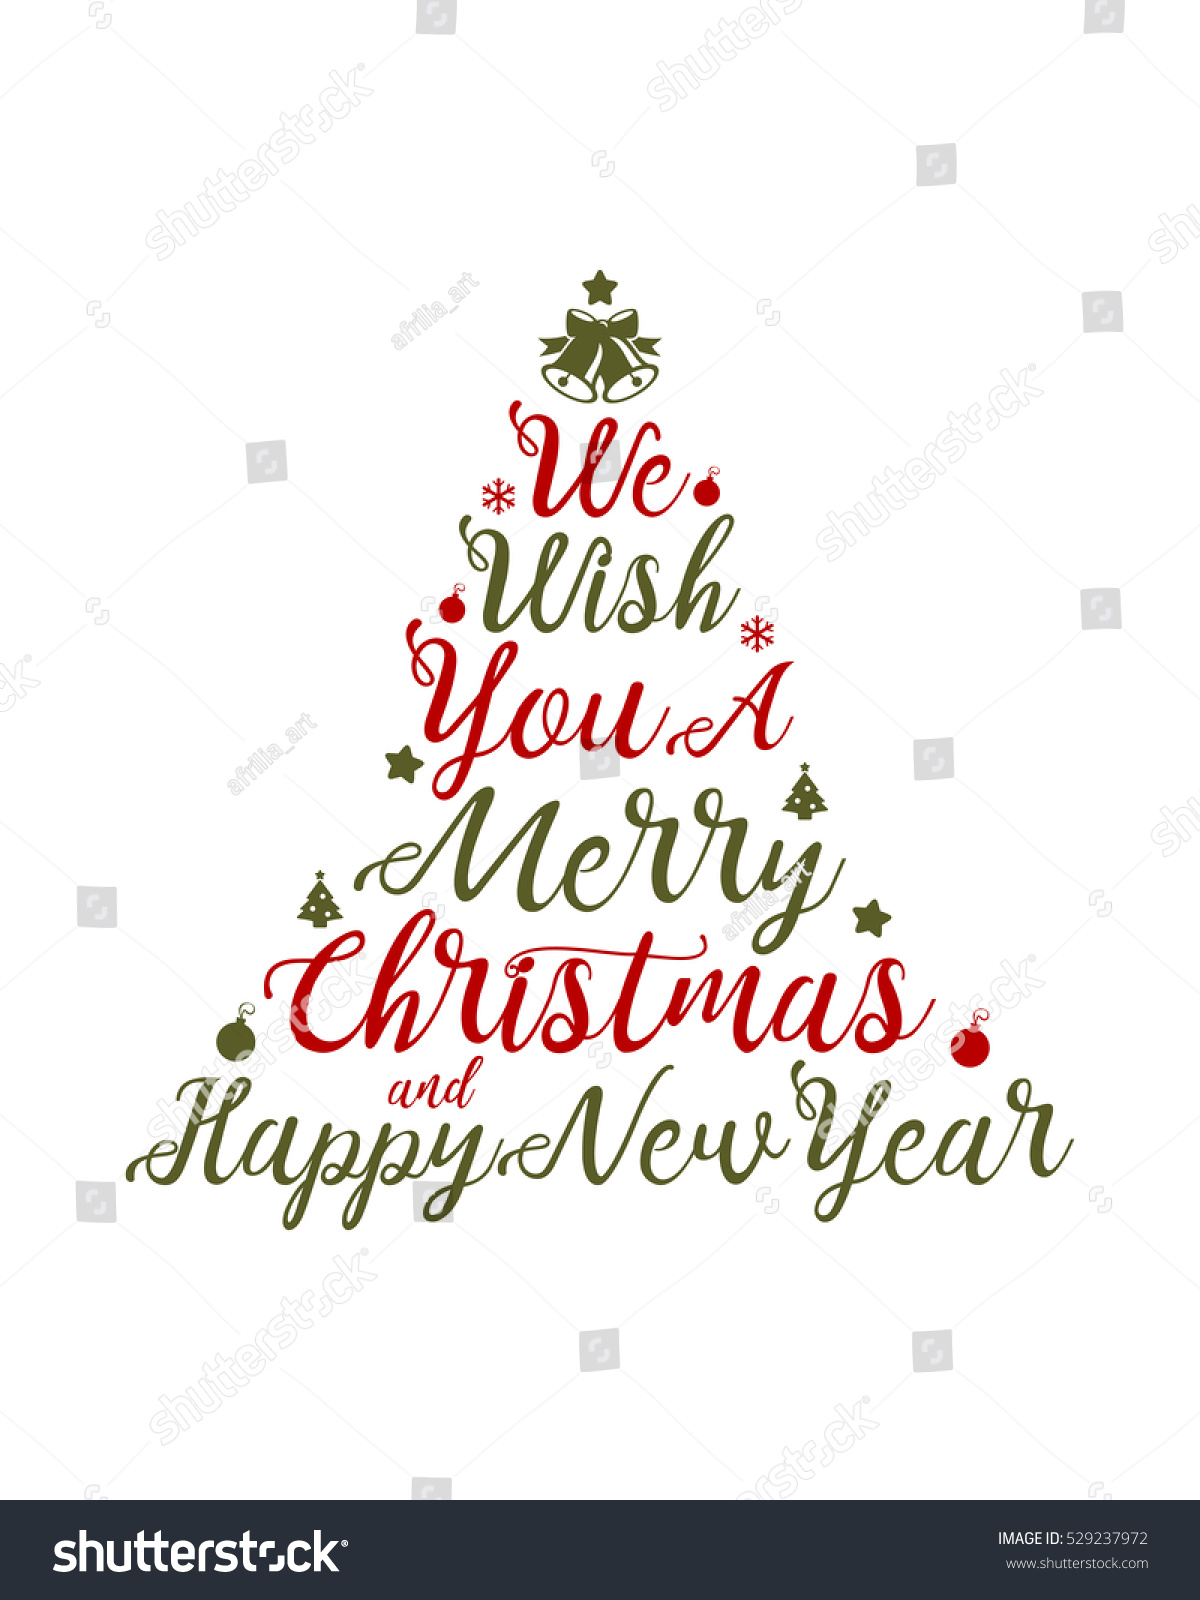 We Wish You A Merry Christmas And A Happy New Year Lettering Design 1 Stock Vector Illustration ...